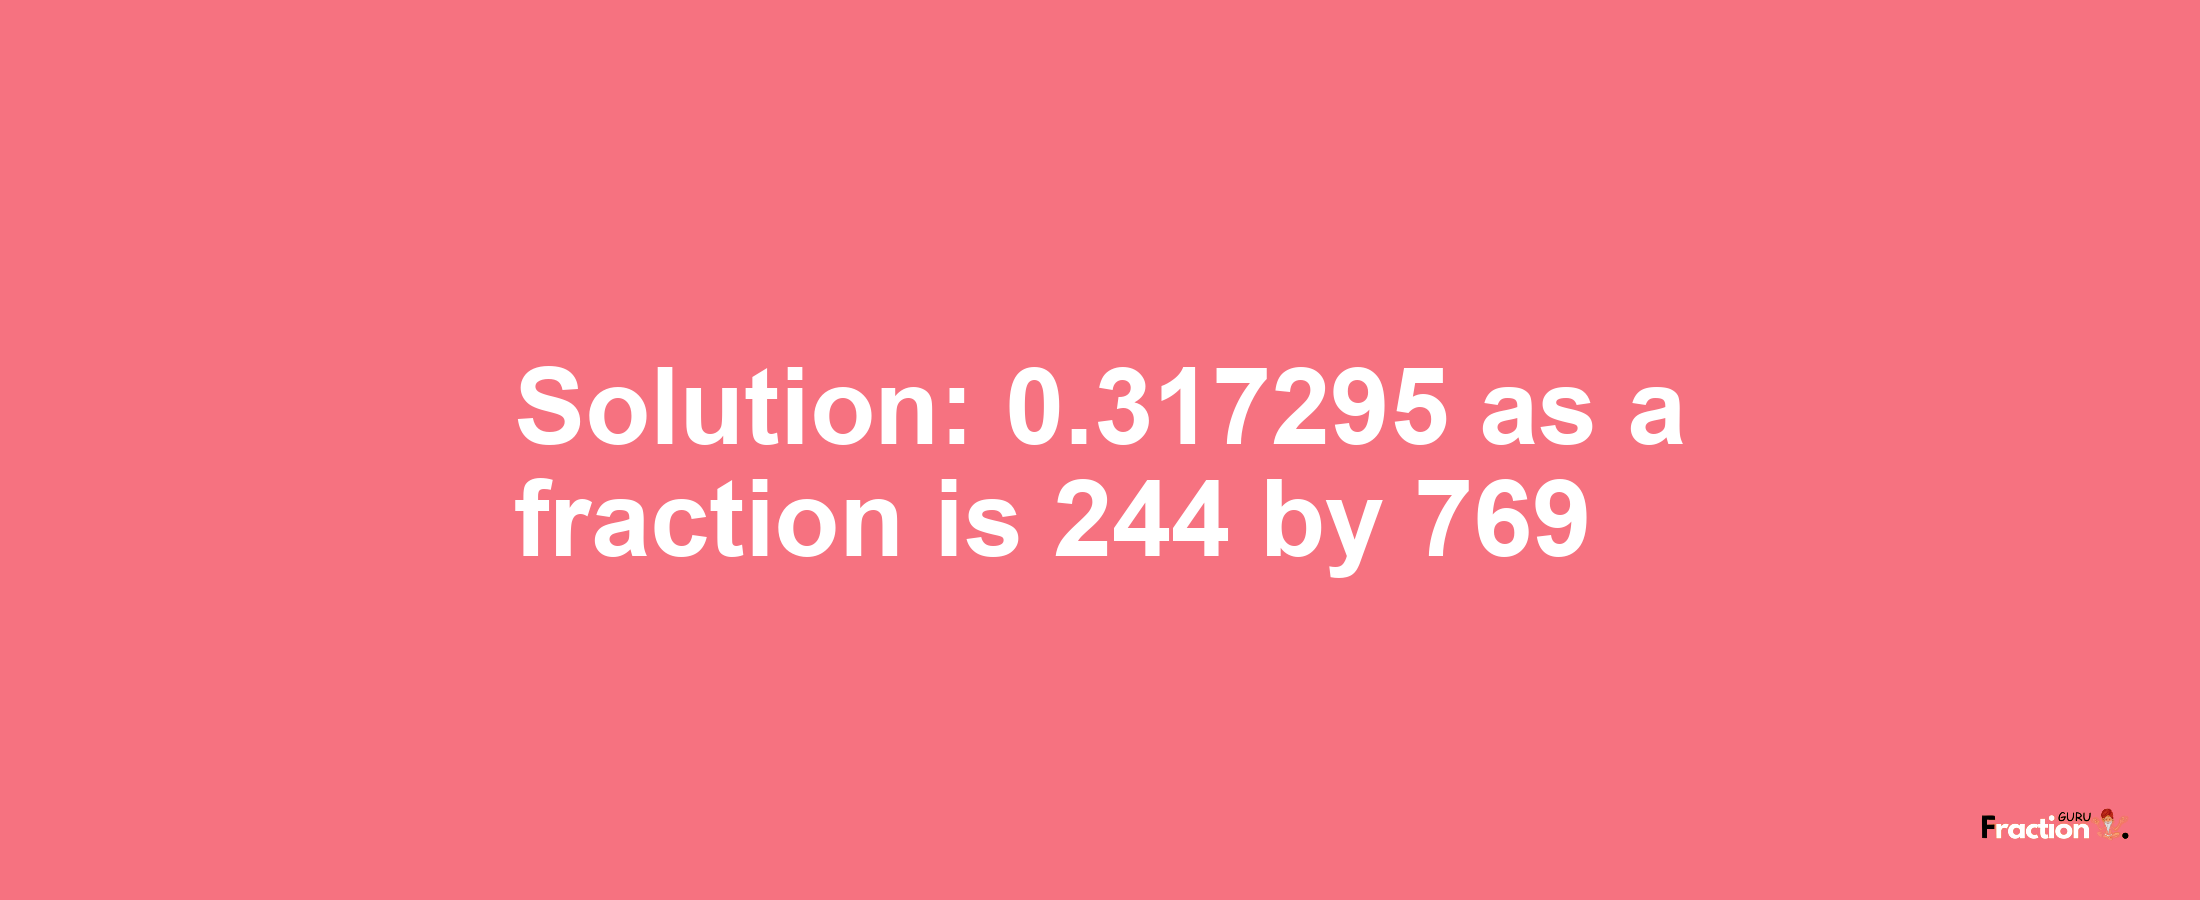 Solution:0.317295 as a fraction is 244/769